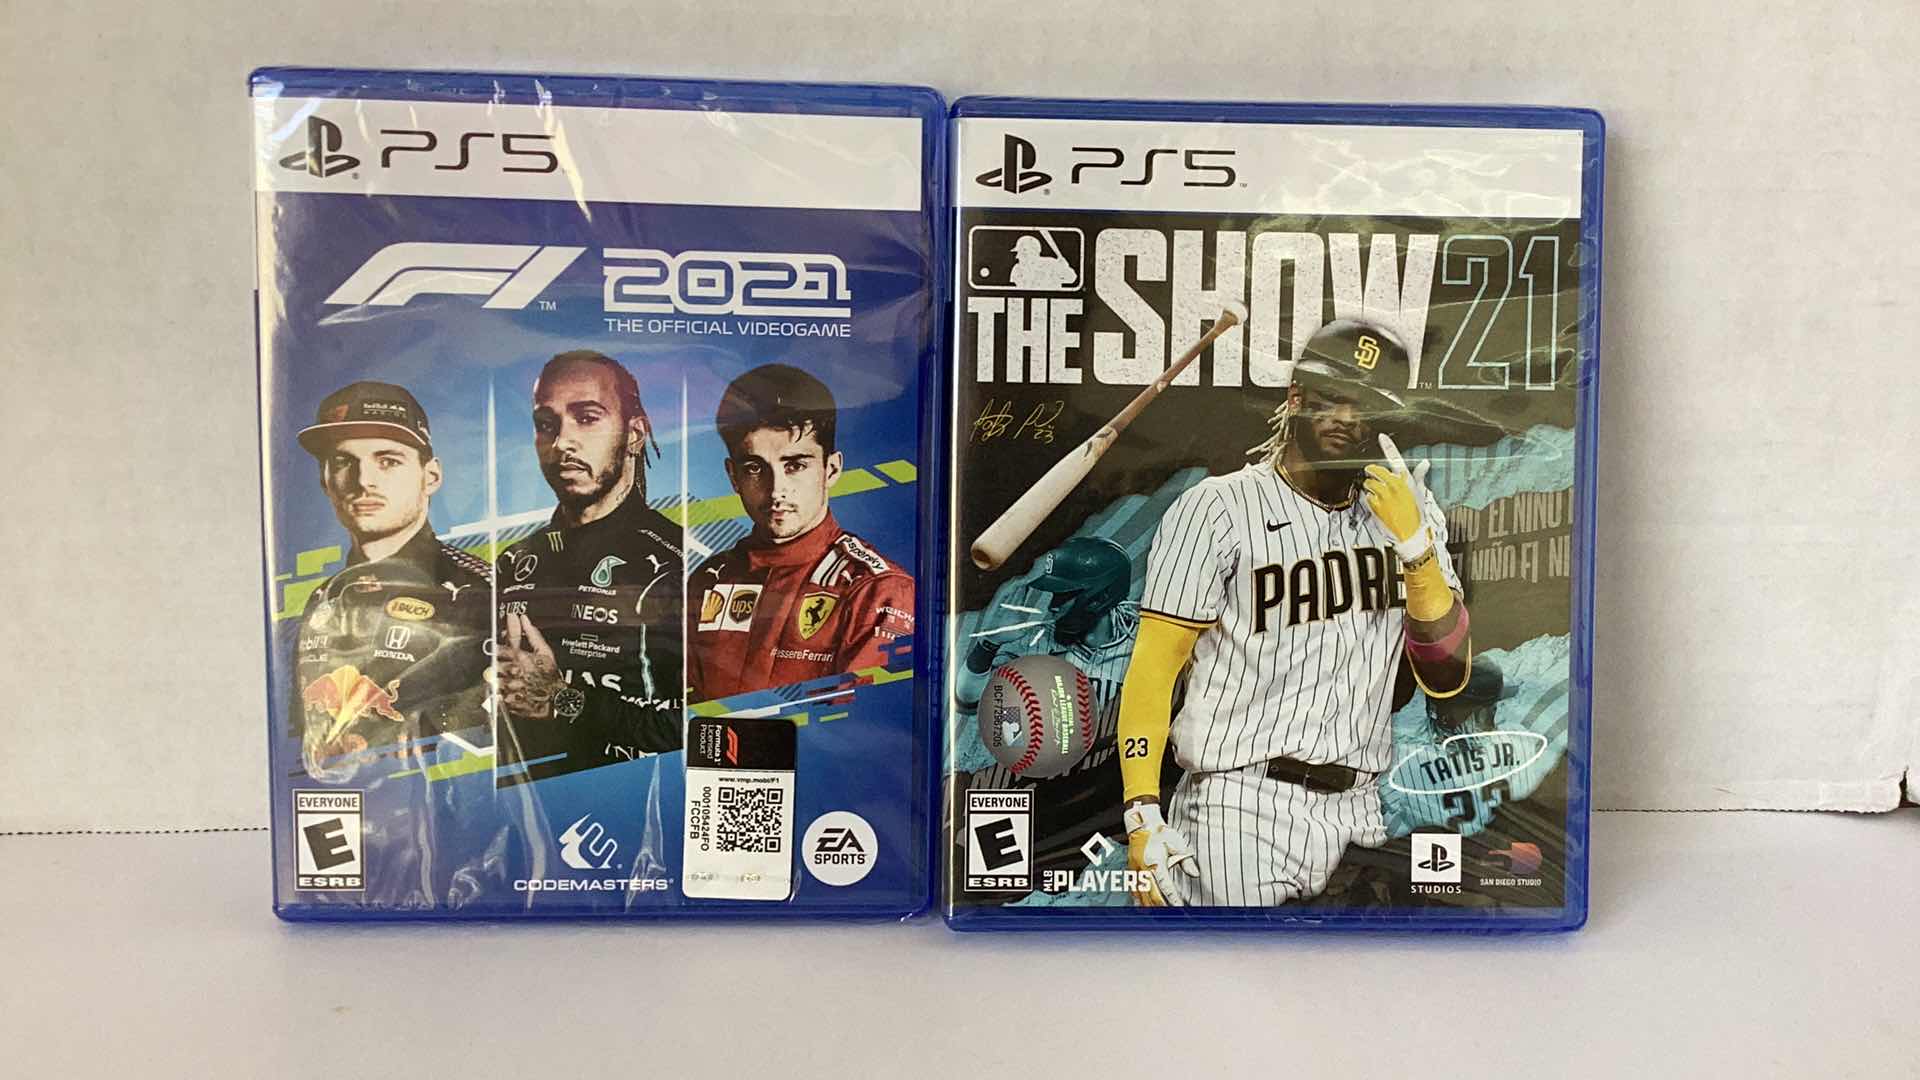 Photo 1 of 2 NEW PS5 GAMES: F1 2021 AND THE SHOW 21